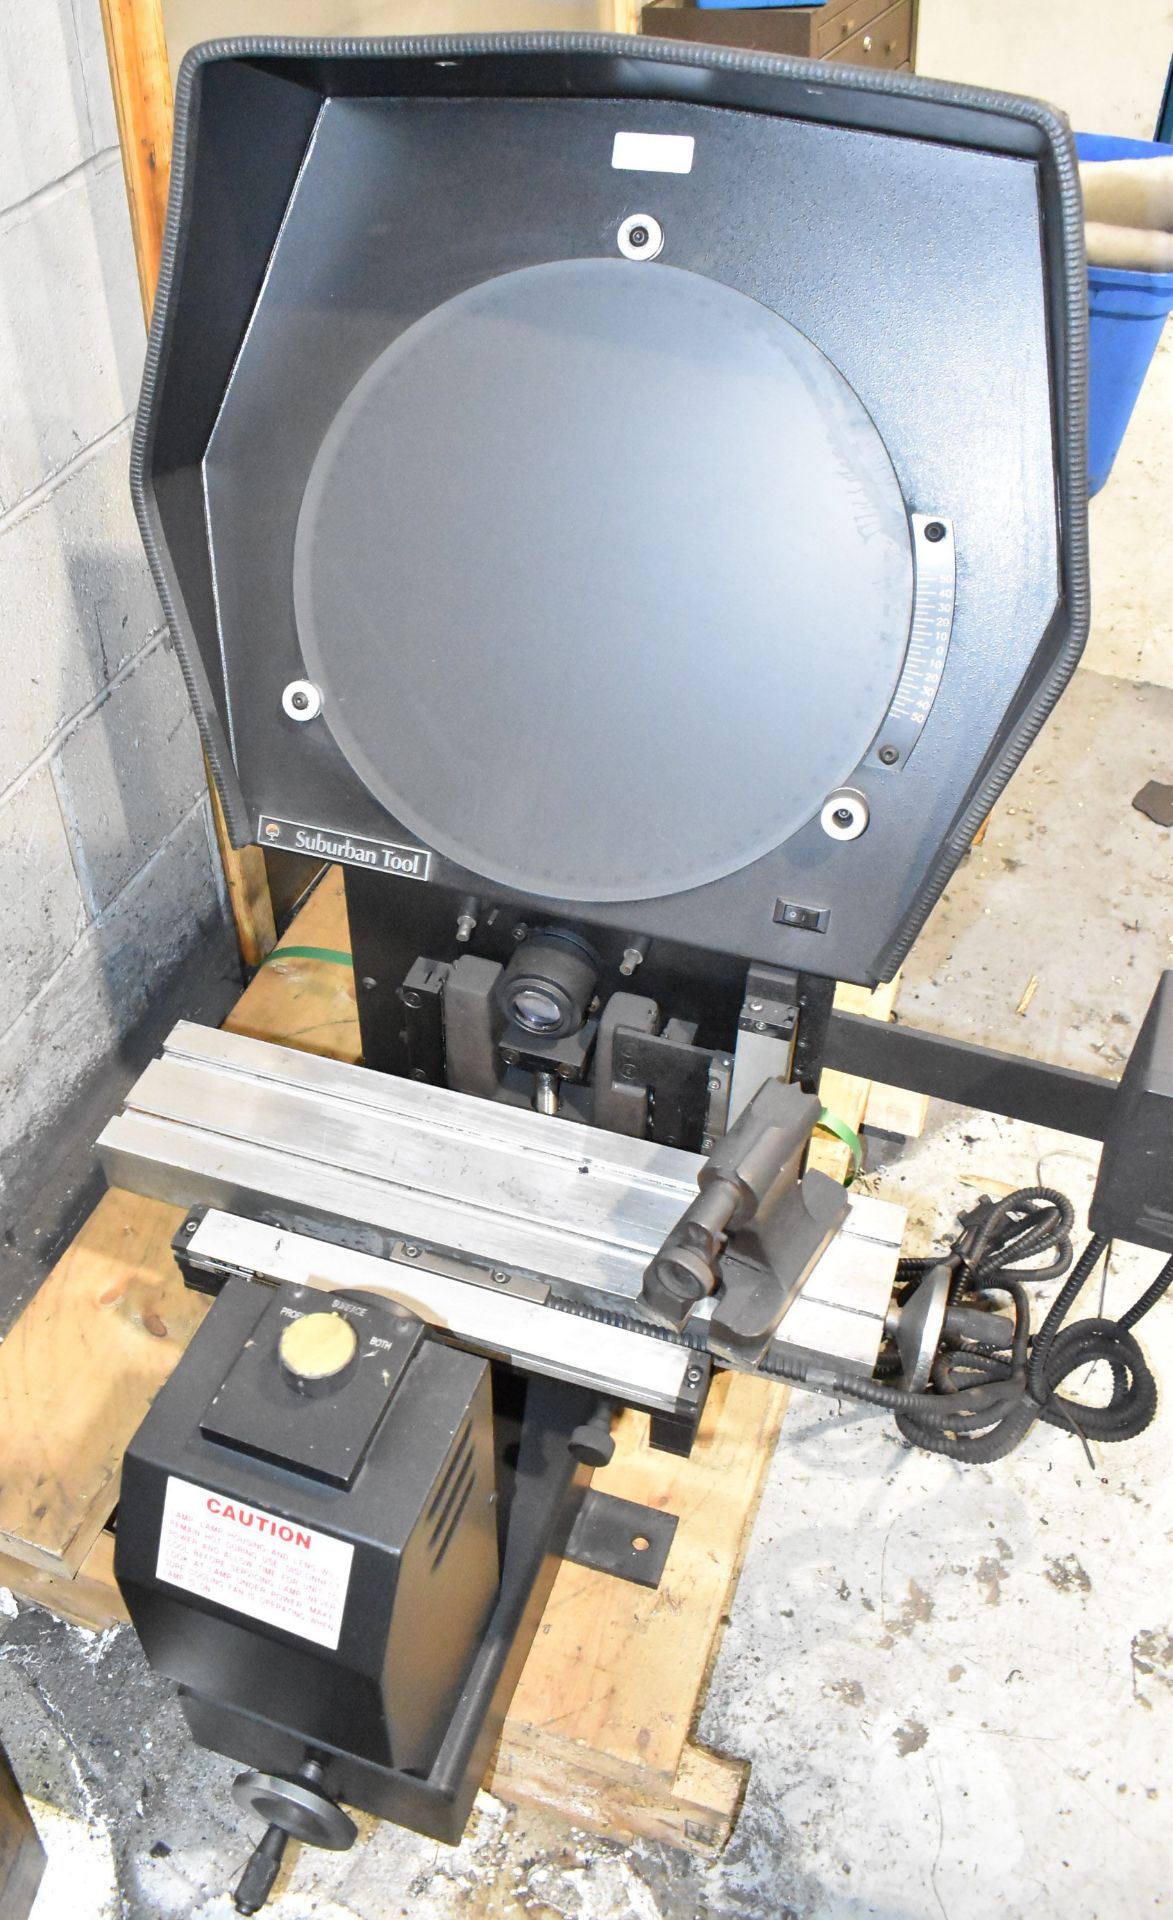 SUBURBAN TOOL MASTER VIEW MV14P OPTICAL COMPARATOR WITH FAGOR NV 20 DRO, S/N 2871-0402F (LOCATED - Image 3 of 8